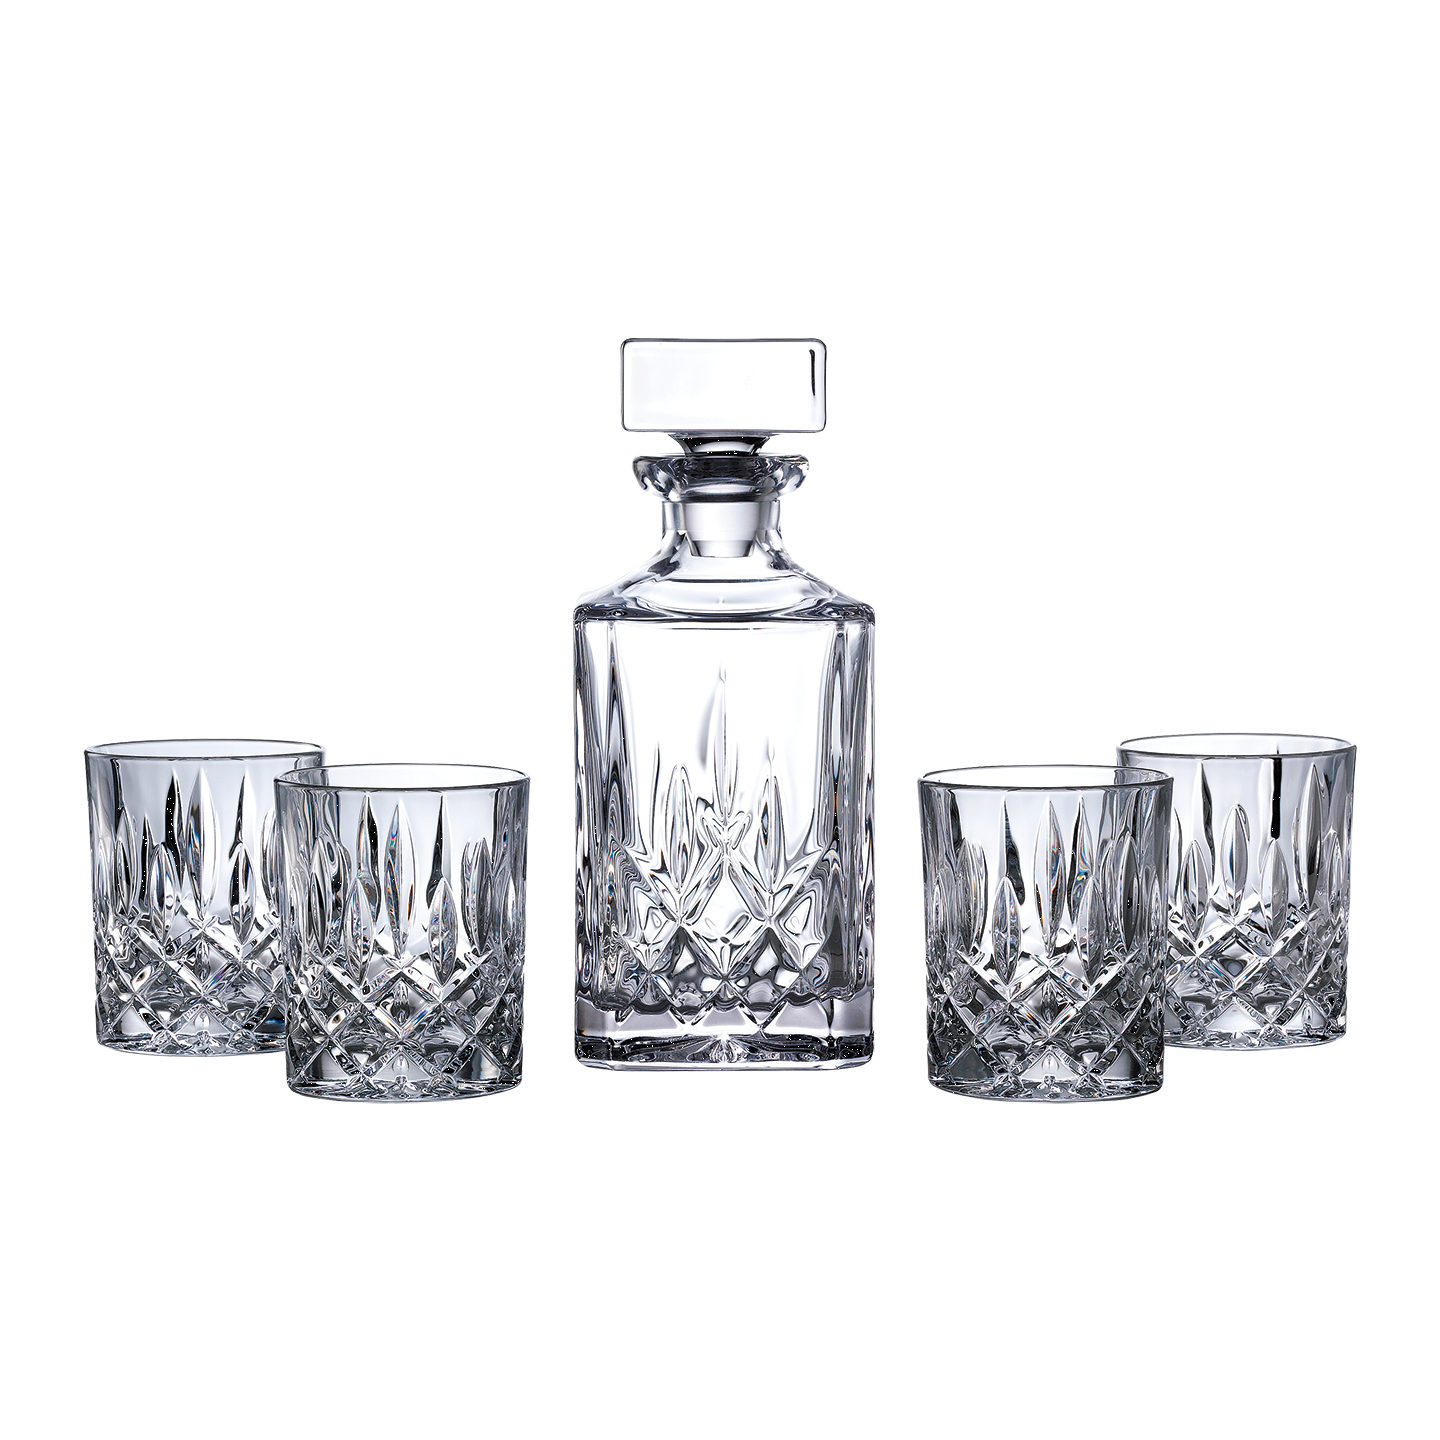 decanter-set-square-crystal-decanter-and-4-tumbler-glasses-royal-doulton